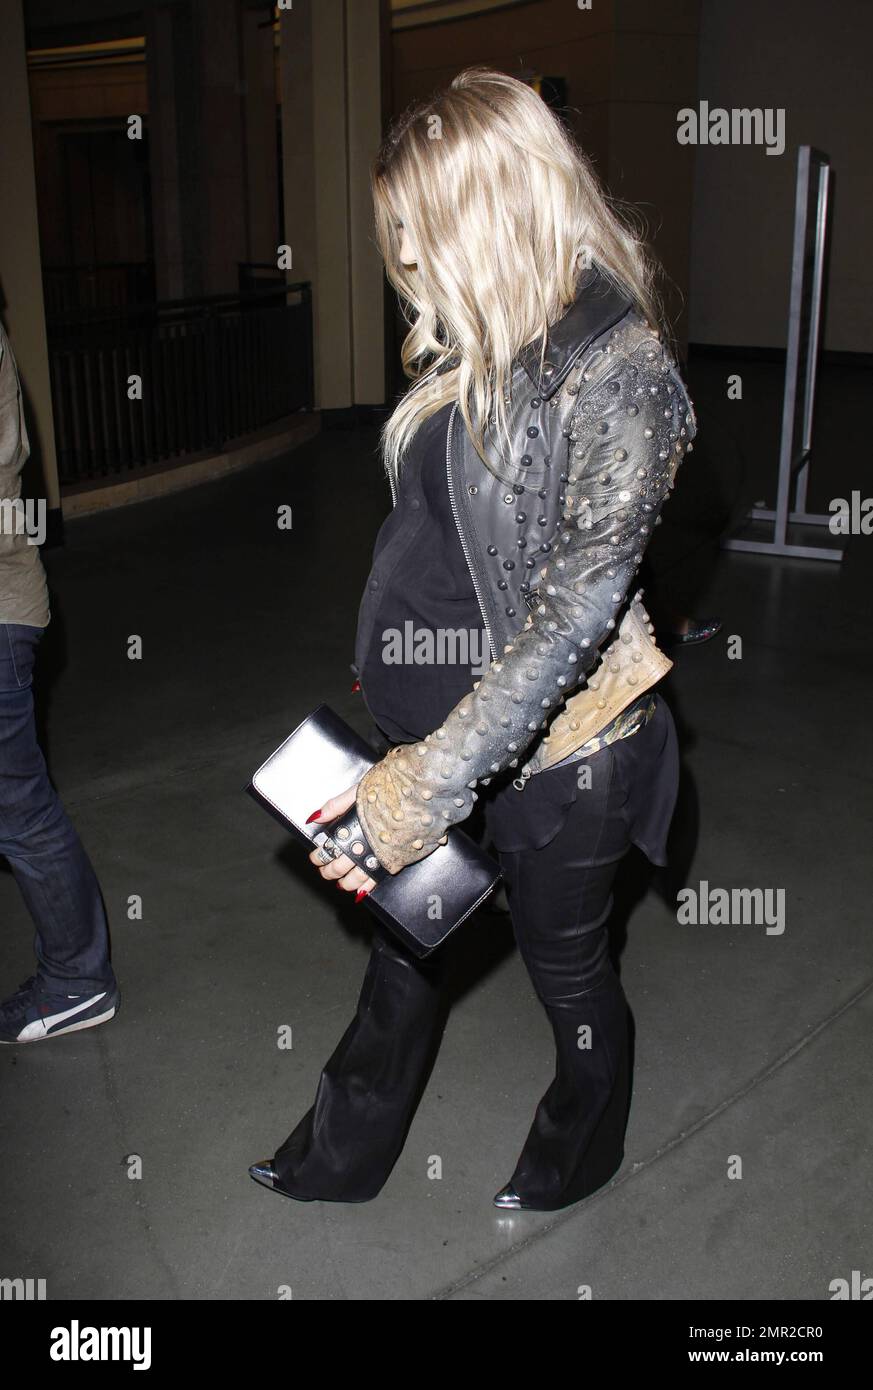 Showing off her baby bump as she awaits the arrival of her first child any day now, Fergie was spotted arriving at the premiere of her husband Josh Duhamel's latest film, "Scenic Route" held at the Chinese 6 Theatre in Hollywood. The 38 year old 'Black Eyed Peas' singer looked amazing in a black studded leather jacket with a sheer black top and black leather pants. Fergie and Josh are reportedly awaiting the arrival of their son at any moment but that did not stop Fergie from coming out to support her hunky husband at his movie premiere. Looking all-aglow, the happy couple appeared in great sp Stock Photo